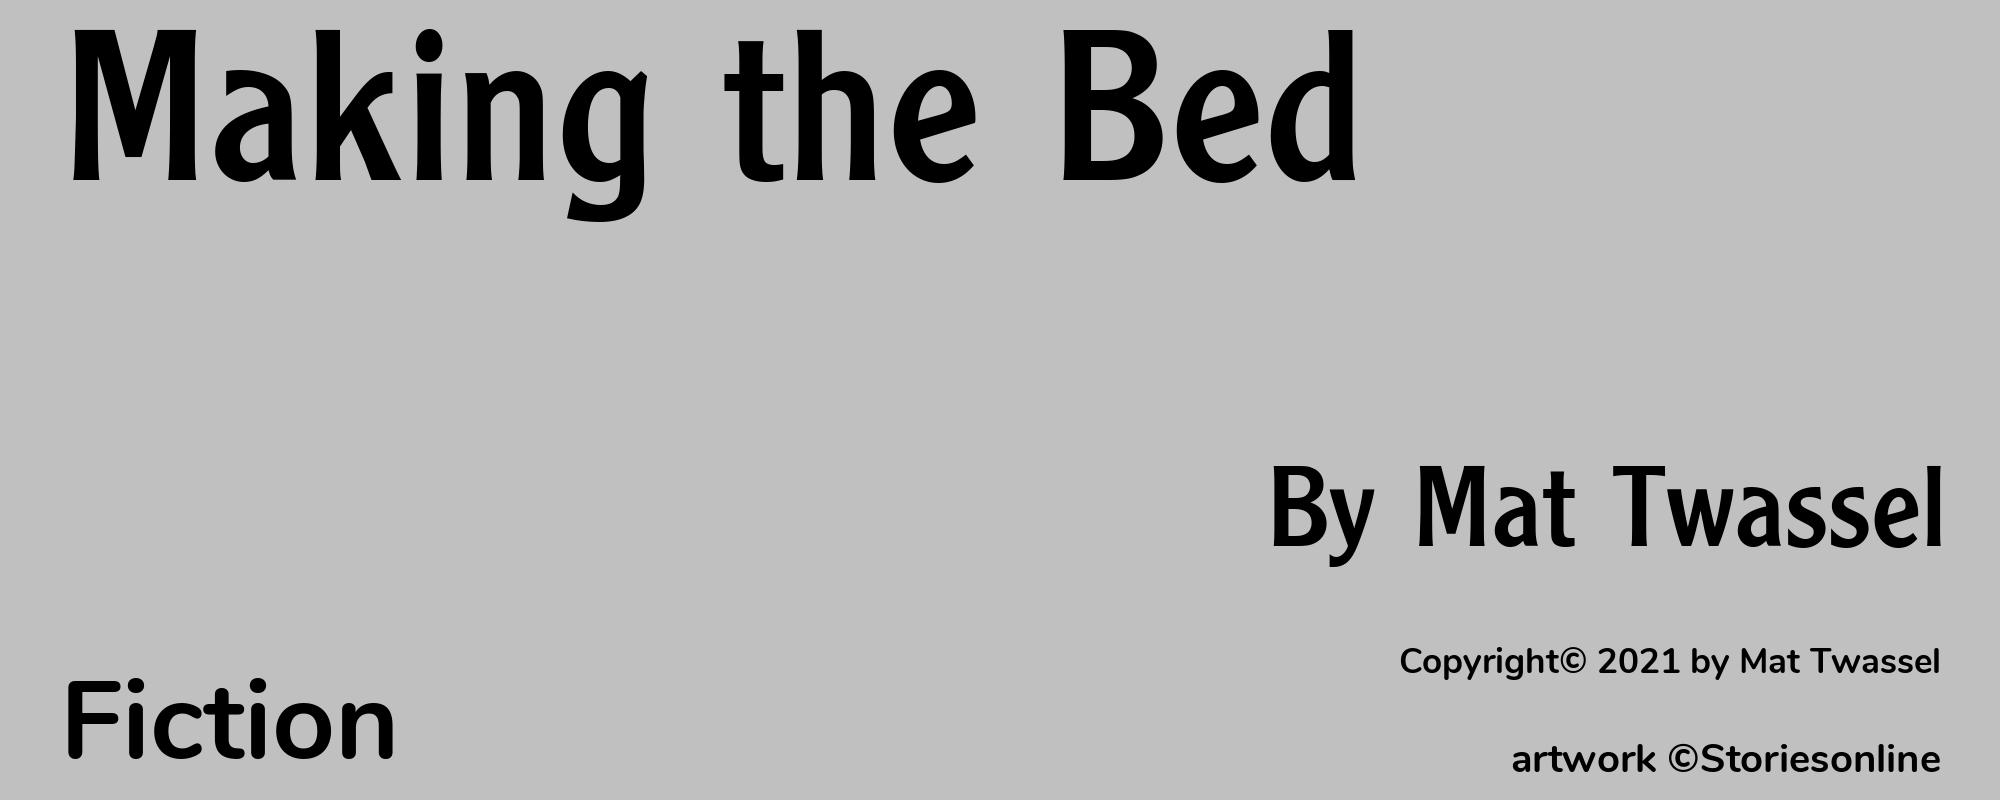 Making the Bed - Cover